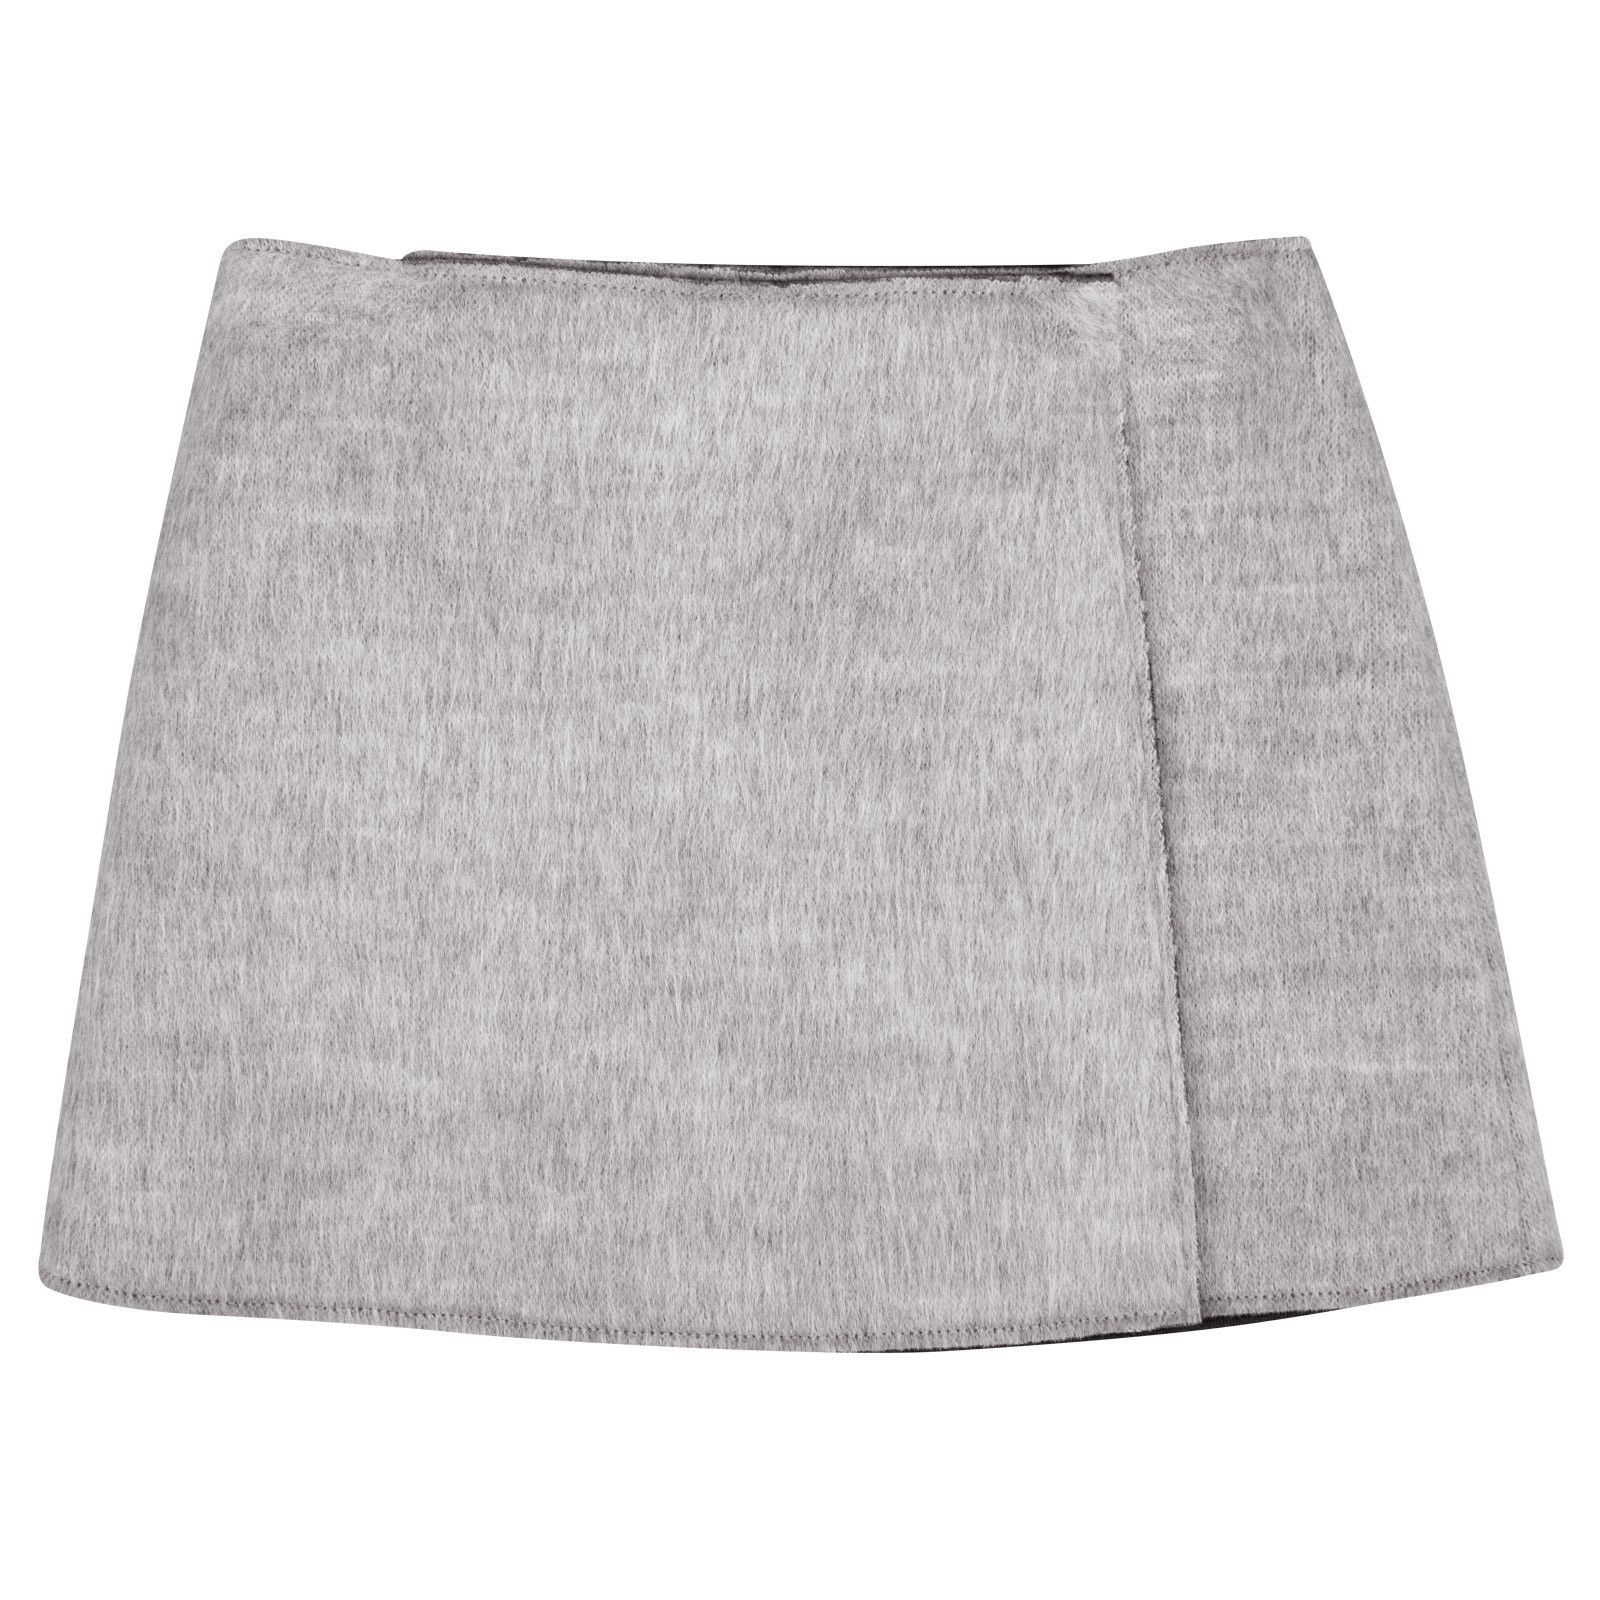 Girls Grey Pasted Synthetic Fur Acrylic Skirt - CÉMAROSE | Children's Fashion Store - 1